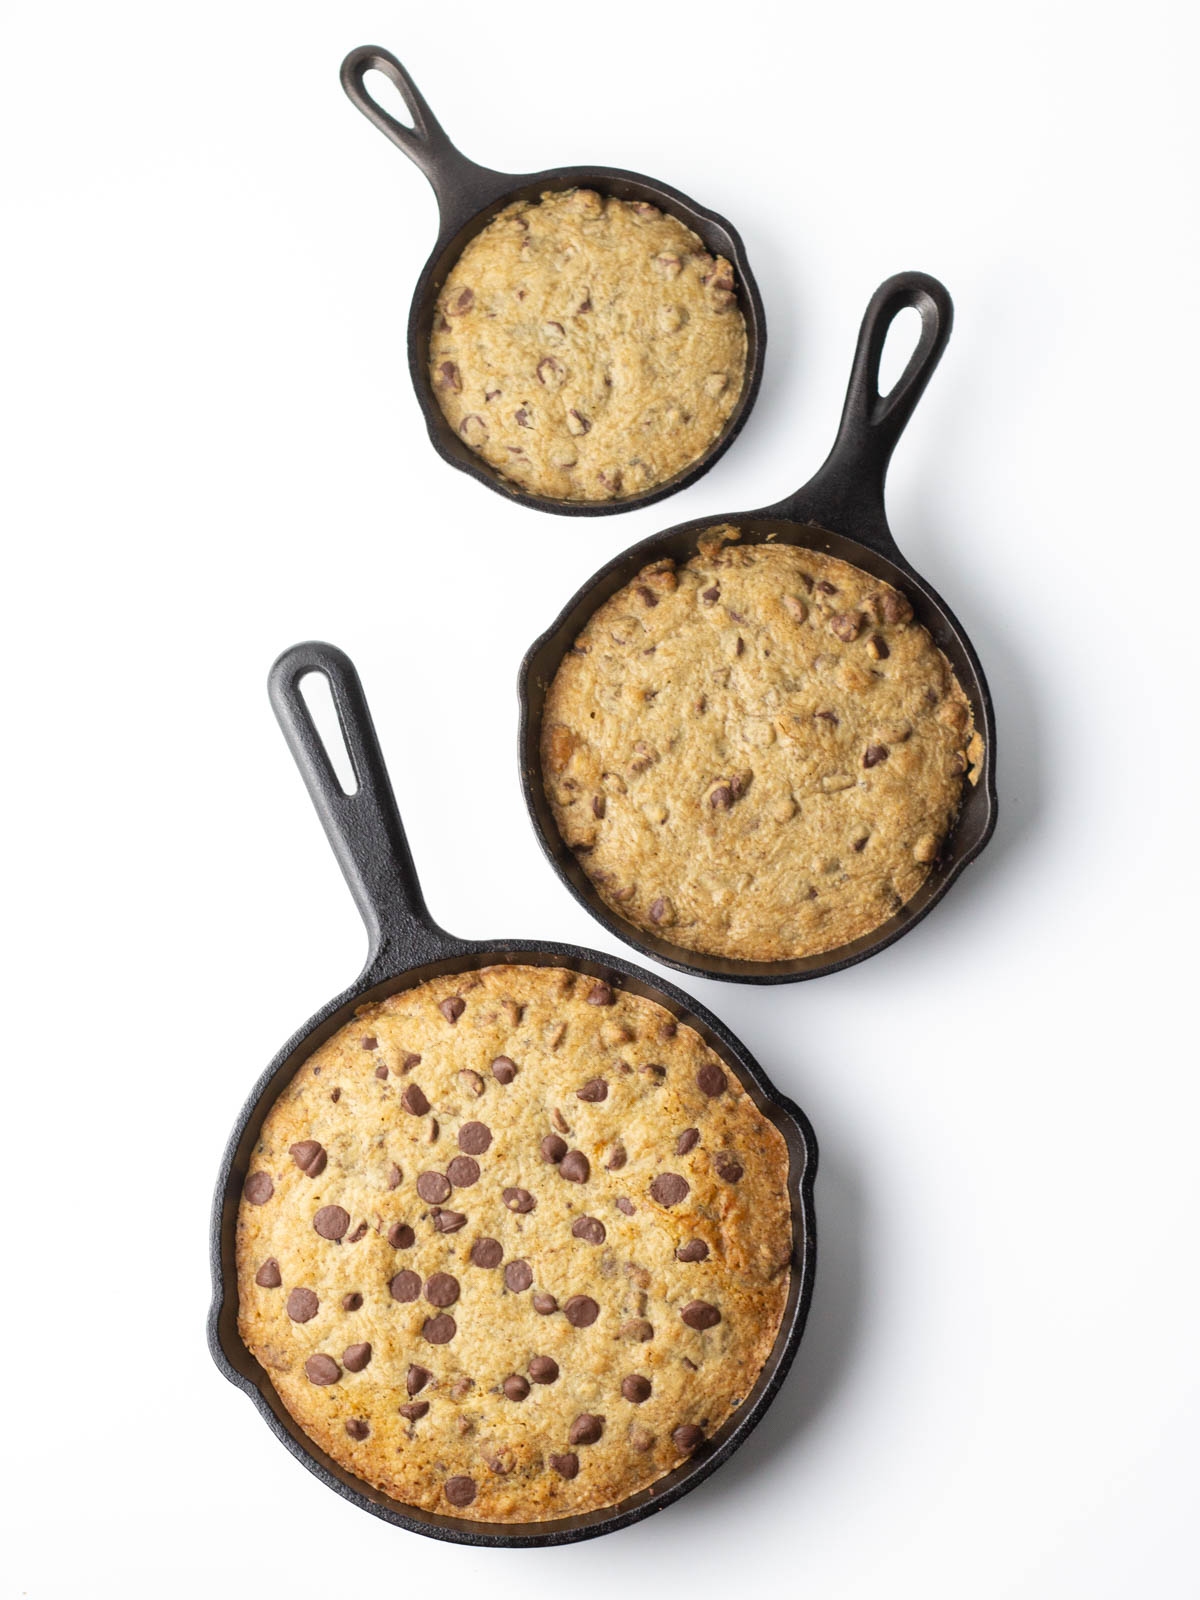 A 5" cast iron skillet cookie at the top, a 6.5" cast iron skillet cookie in the middle, and an 8" cast iron skillet cookie at the bottom.